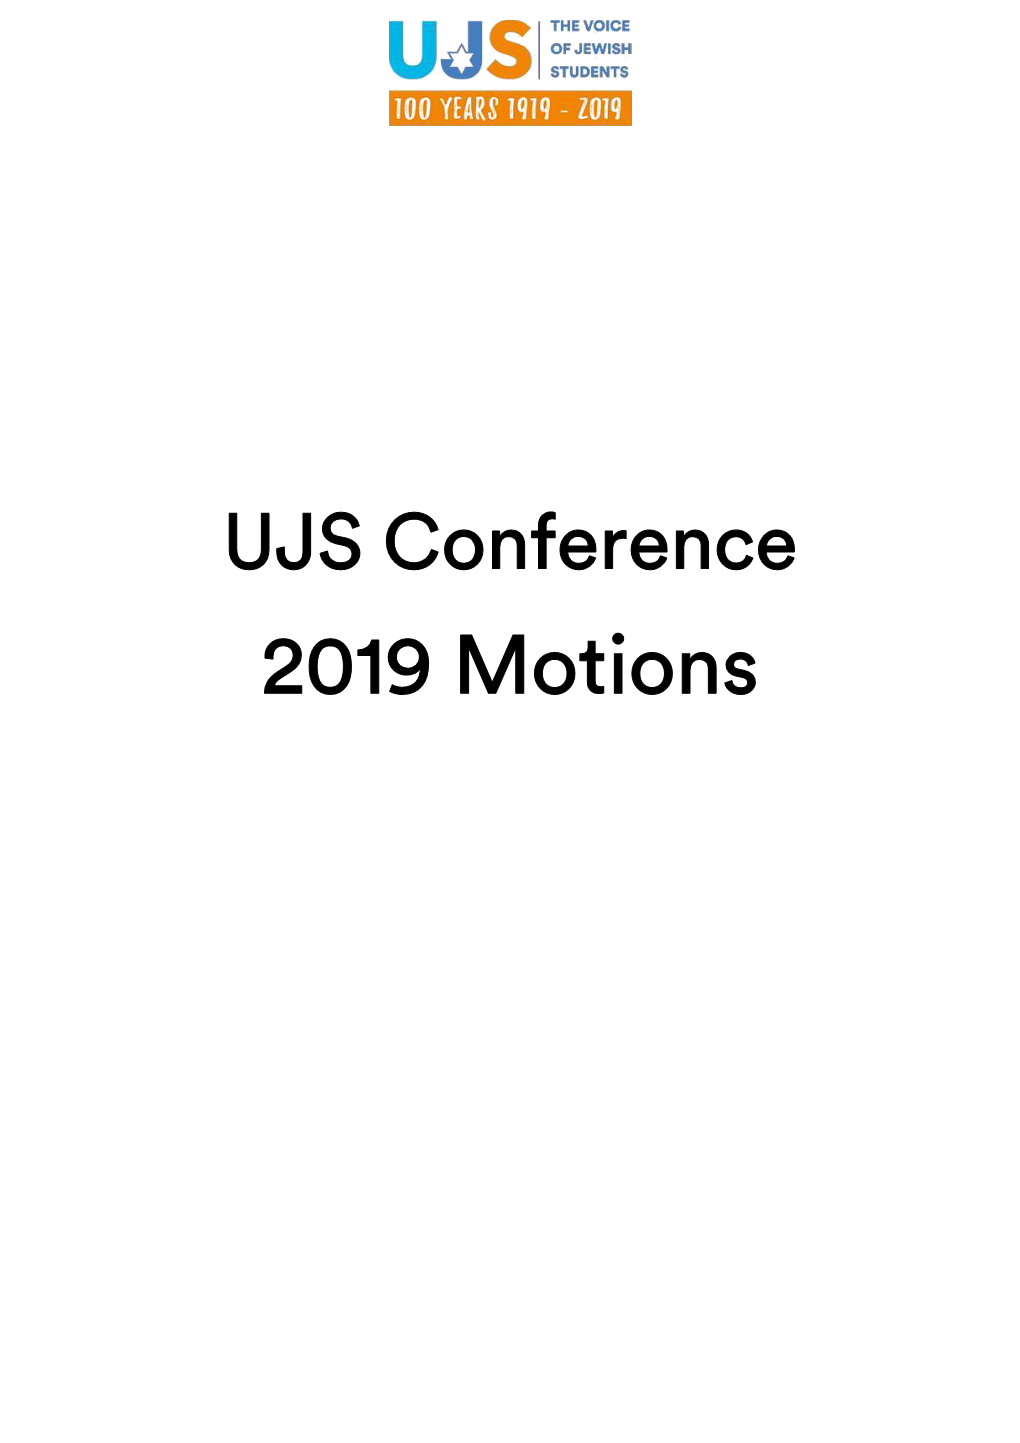 2019 Motions